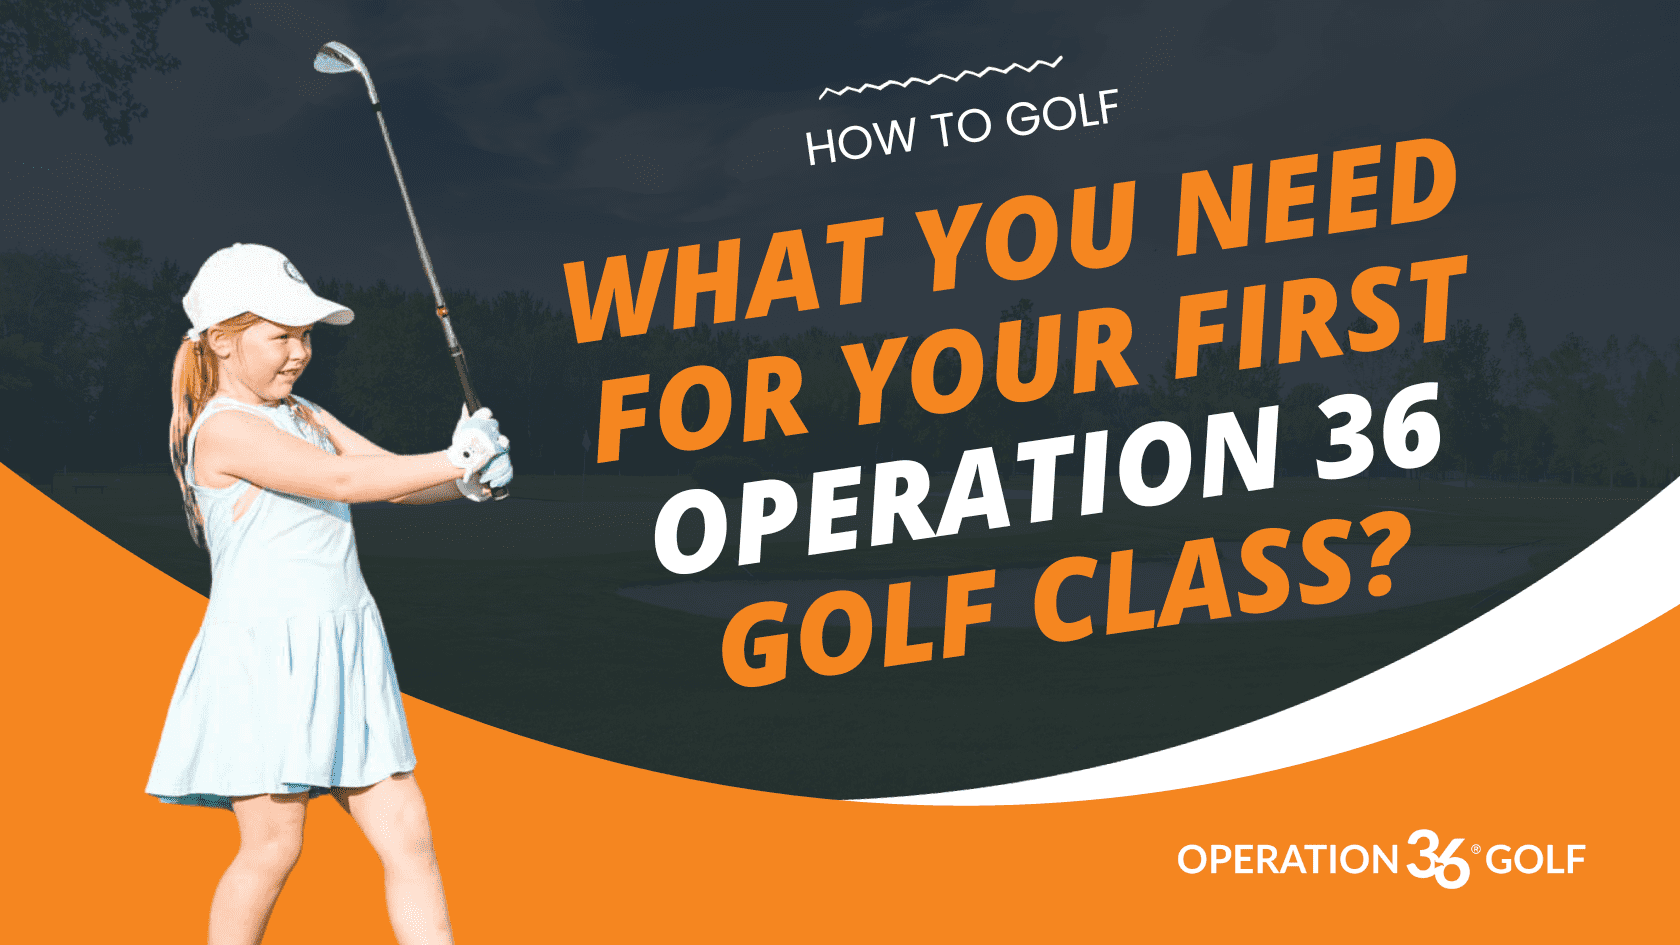 How To Golf: Operation 36